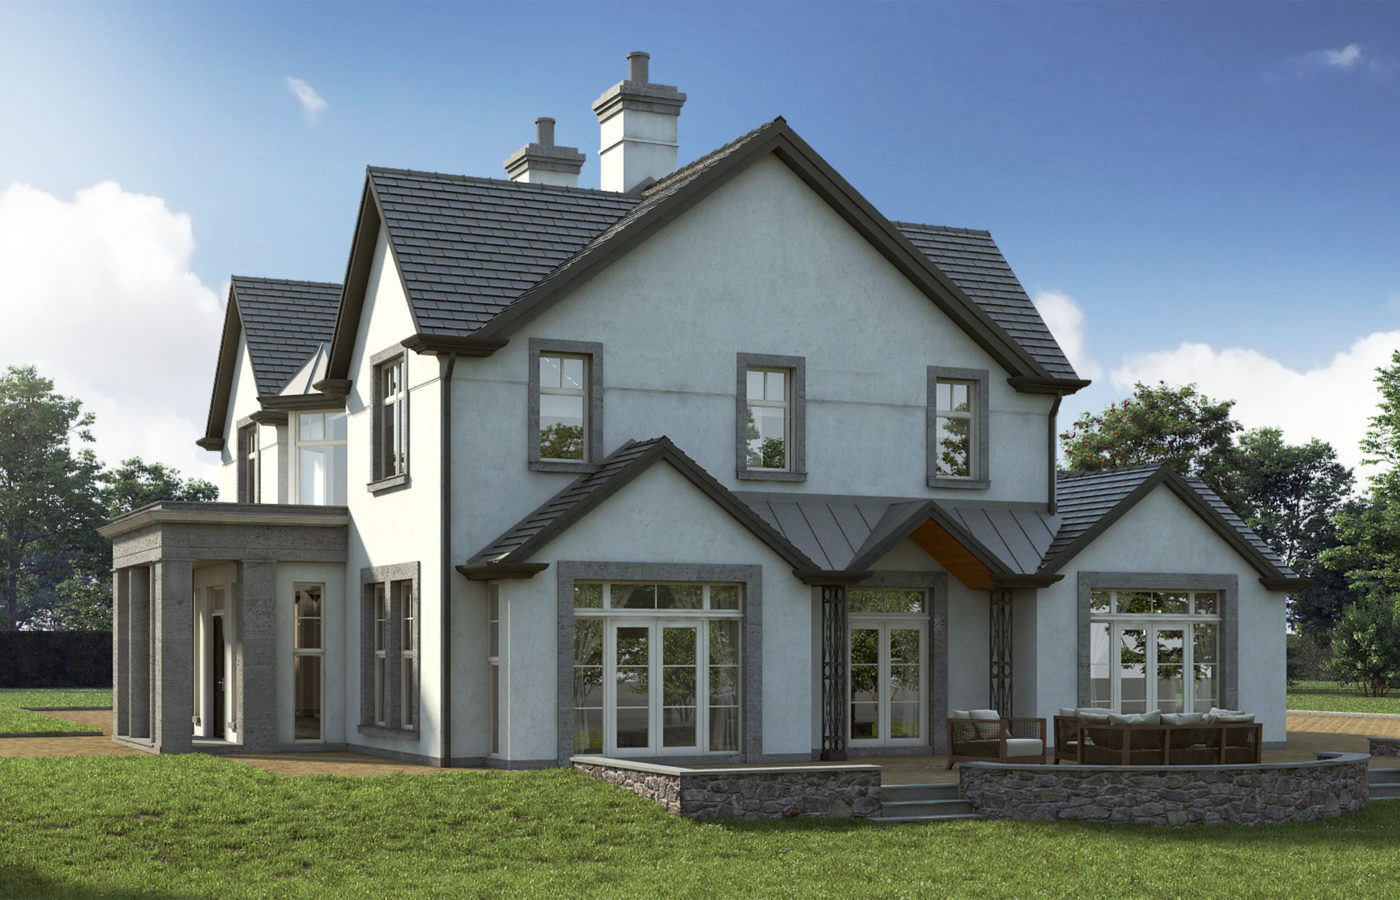 Country House, Architectural Visualisation, CGI Rendering, 3D House, 3D Visualisation, G-Net 3D, Cork, Ireland, Sherry Fitzgerald https://gnet.ie/